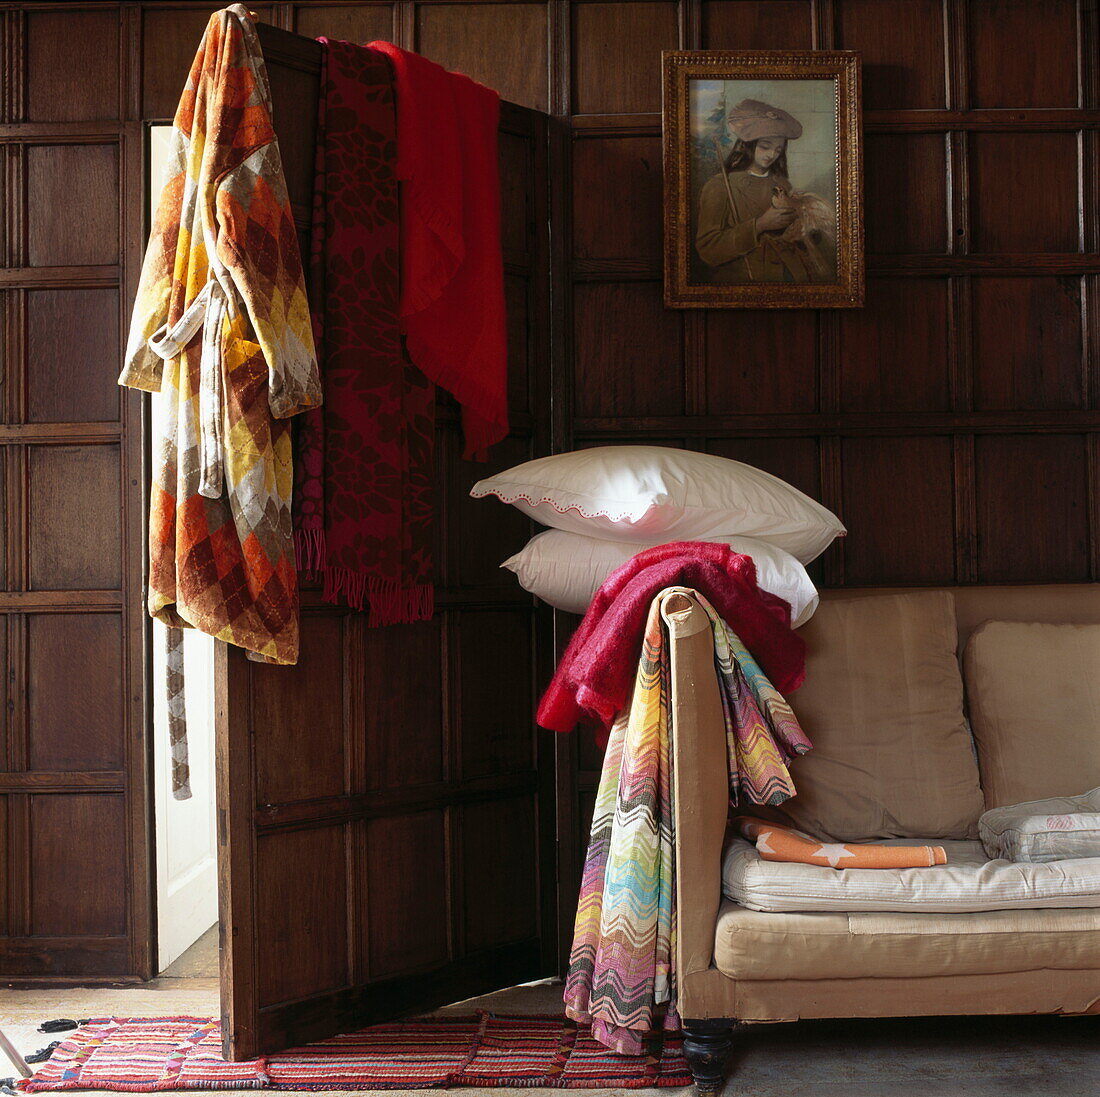 Pillows and blankets with bathrobe and sofa in panelled room of London home, UK